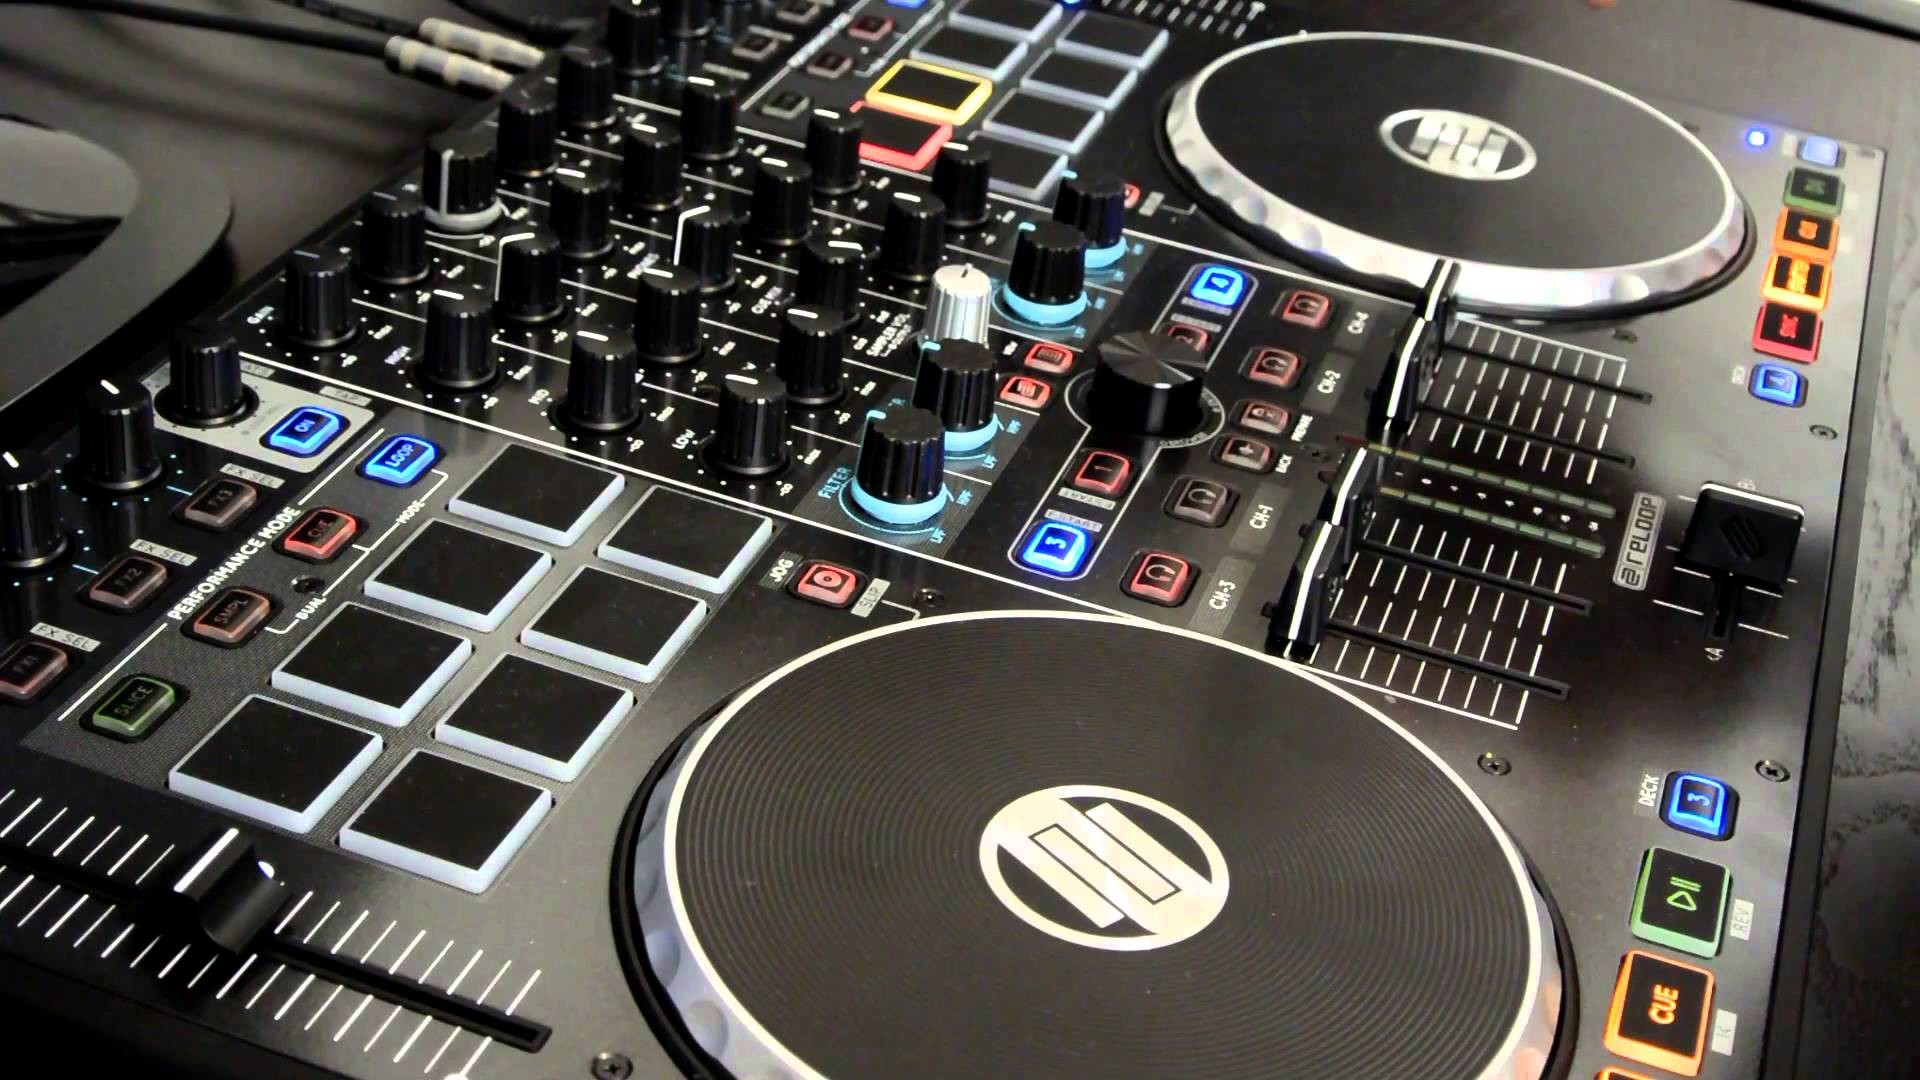 1920x1080 Reloop Terminal Mix 8 Professional Serato DJ Controller HD-Video Review -  YouTube